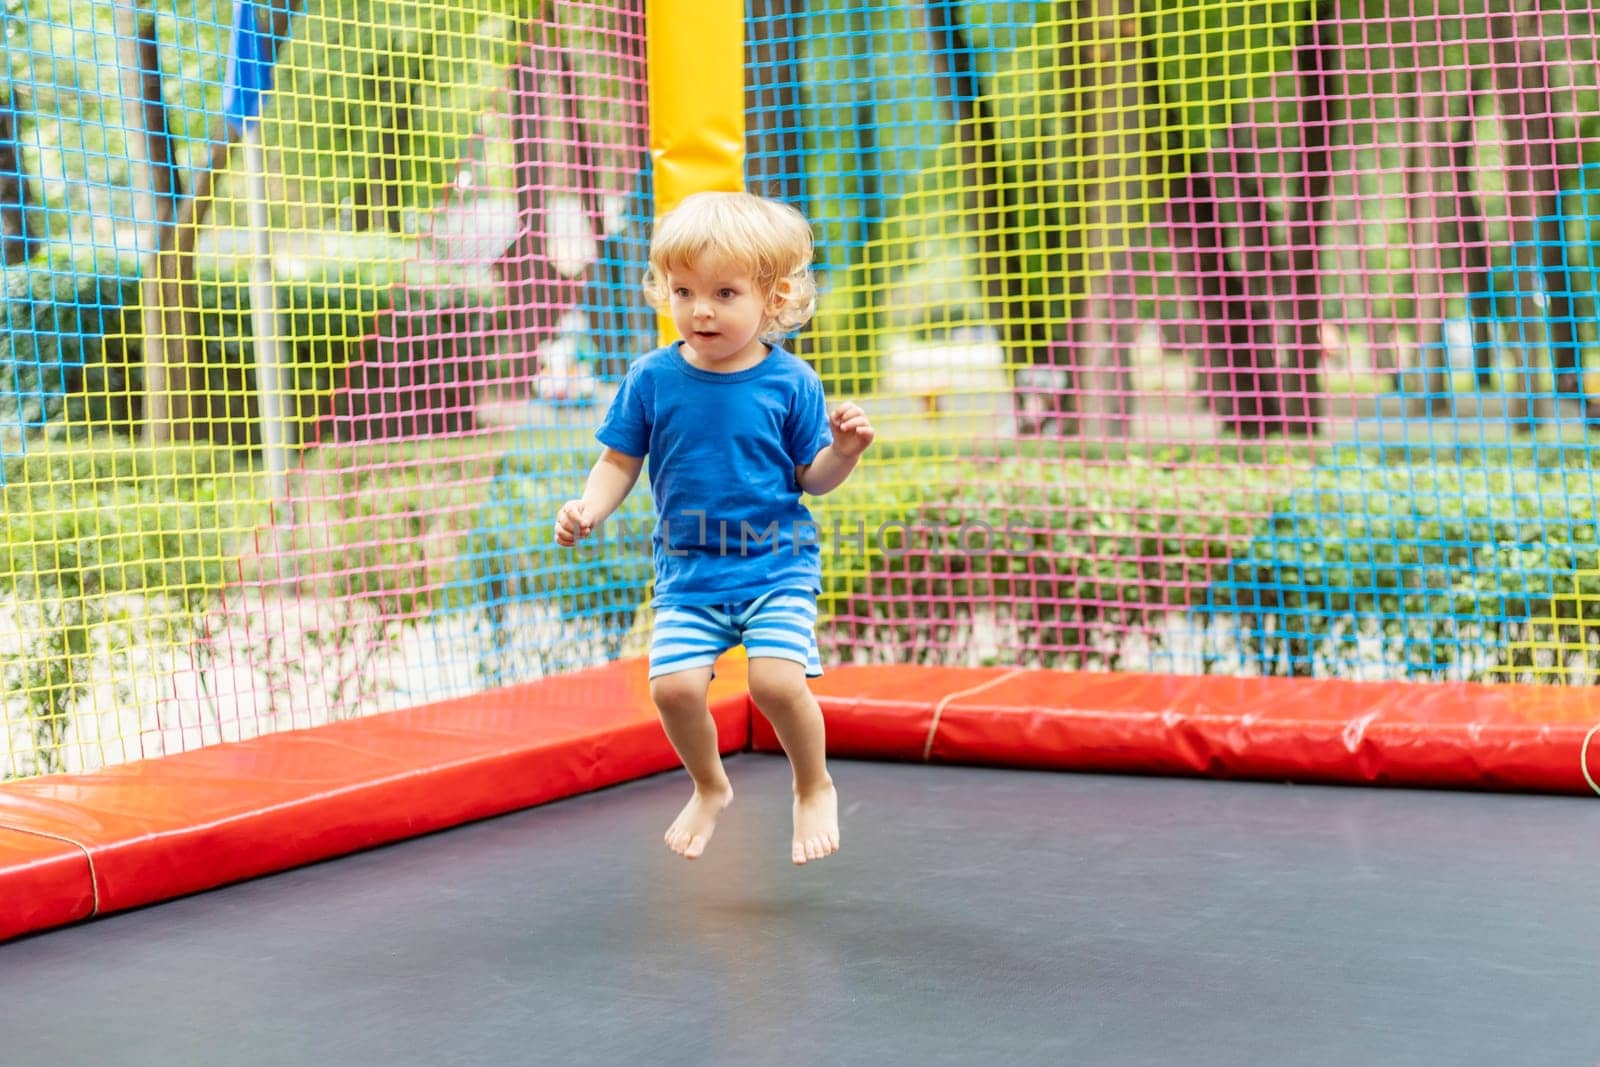 Toddler boy in blue outfit jumping on colorful outdoor trampoline. Playful activity and fun concept. Design for banner, poster.